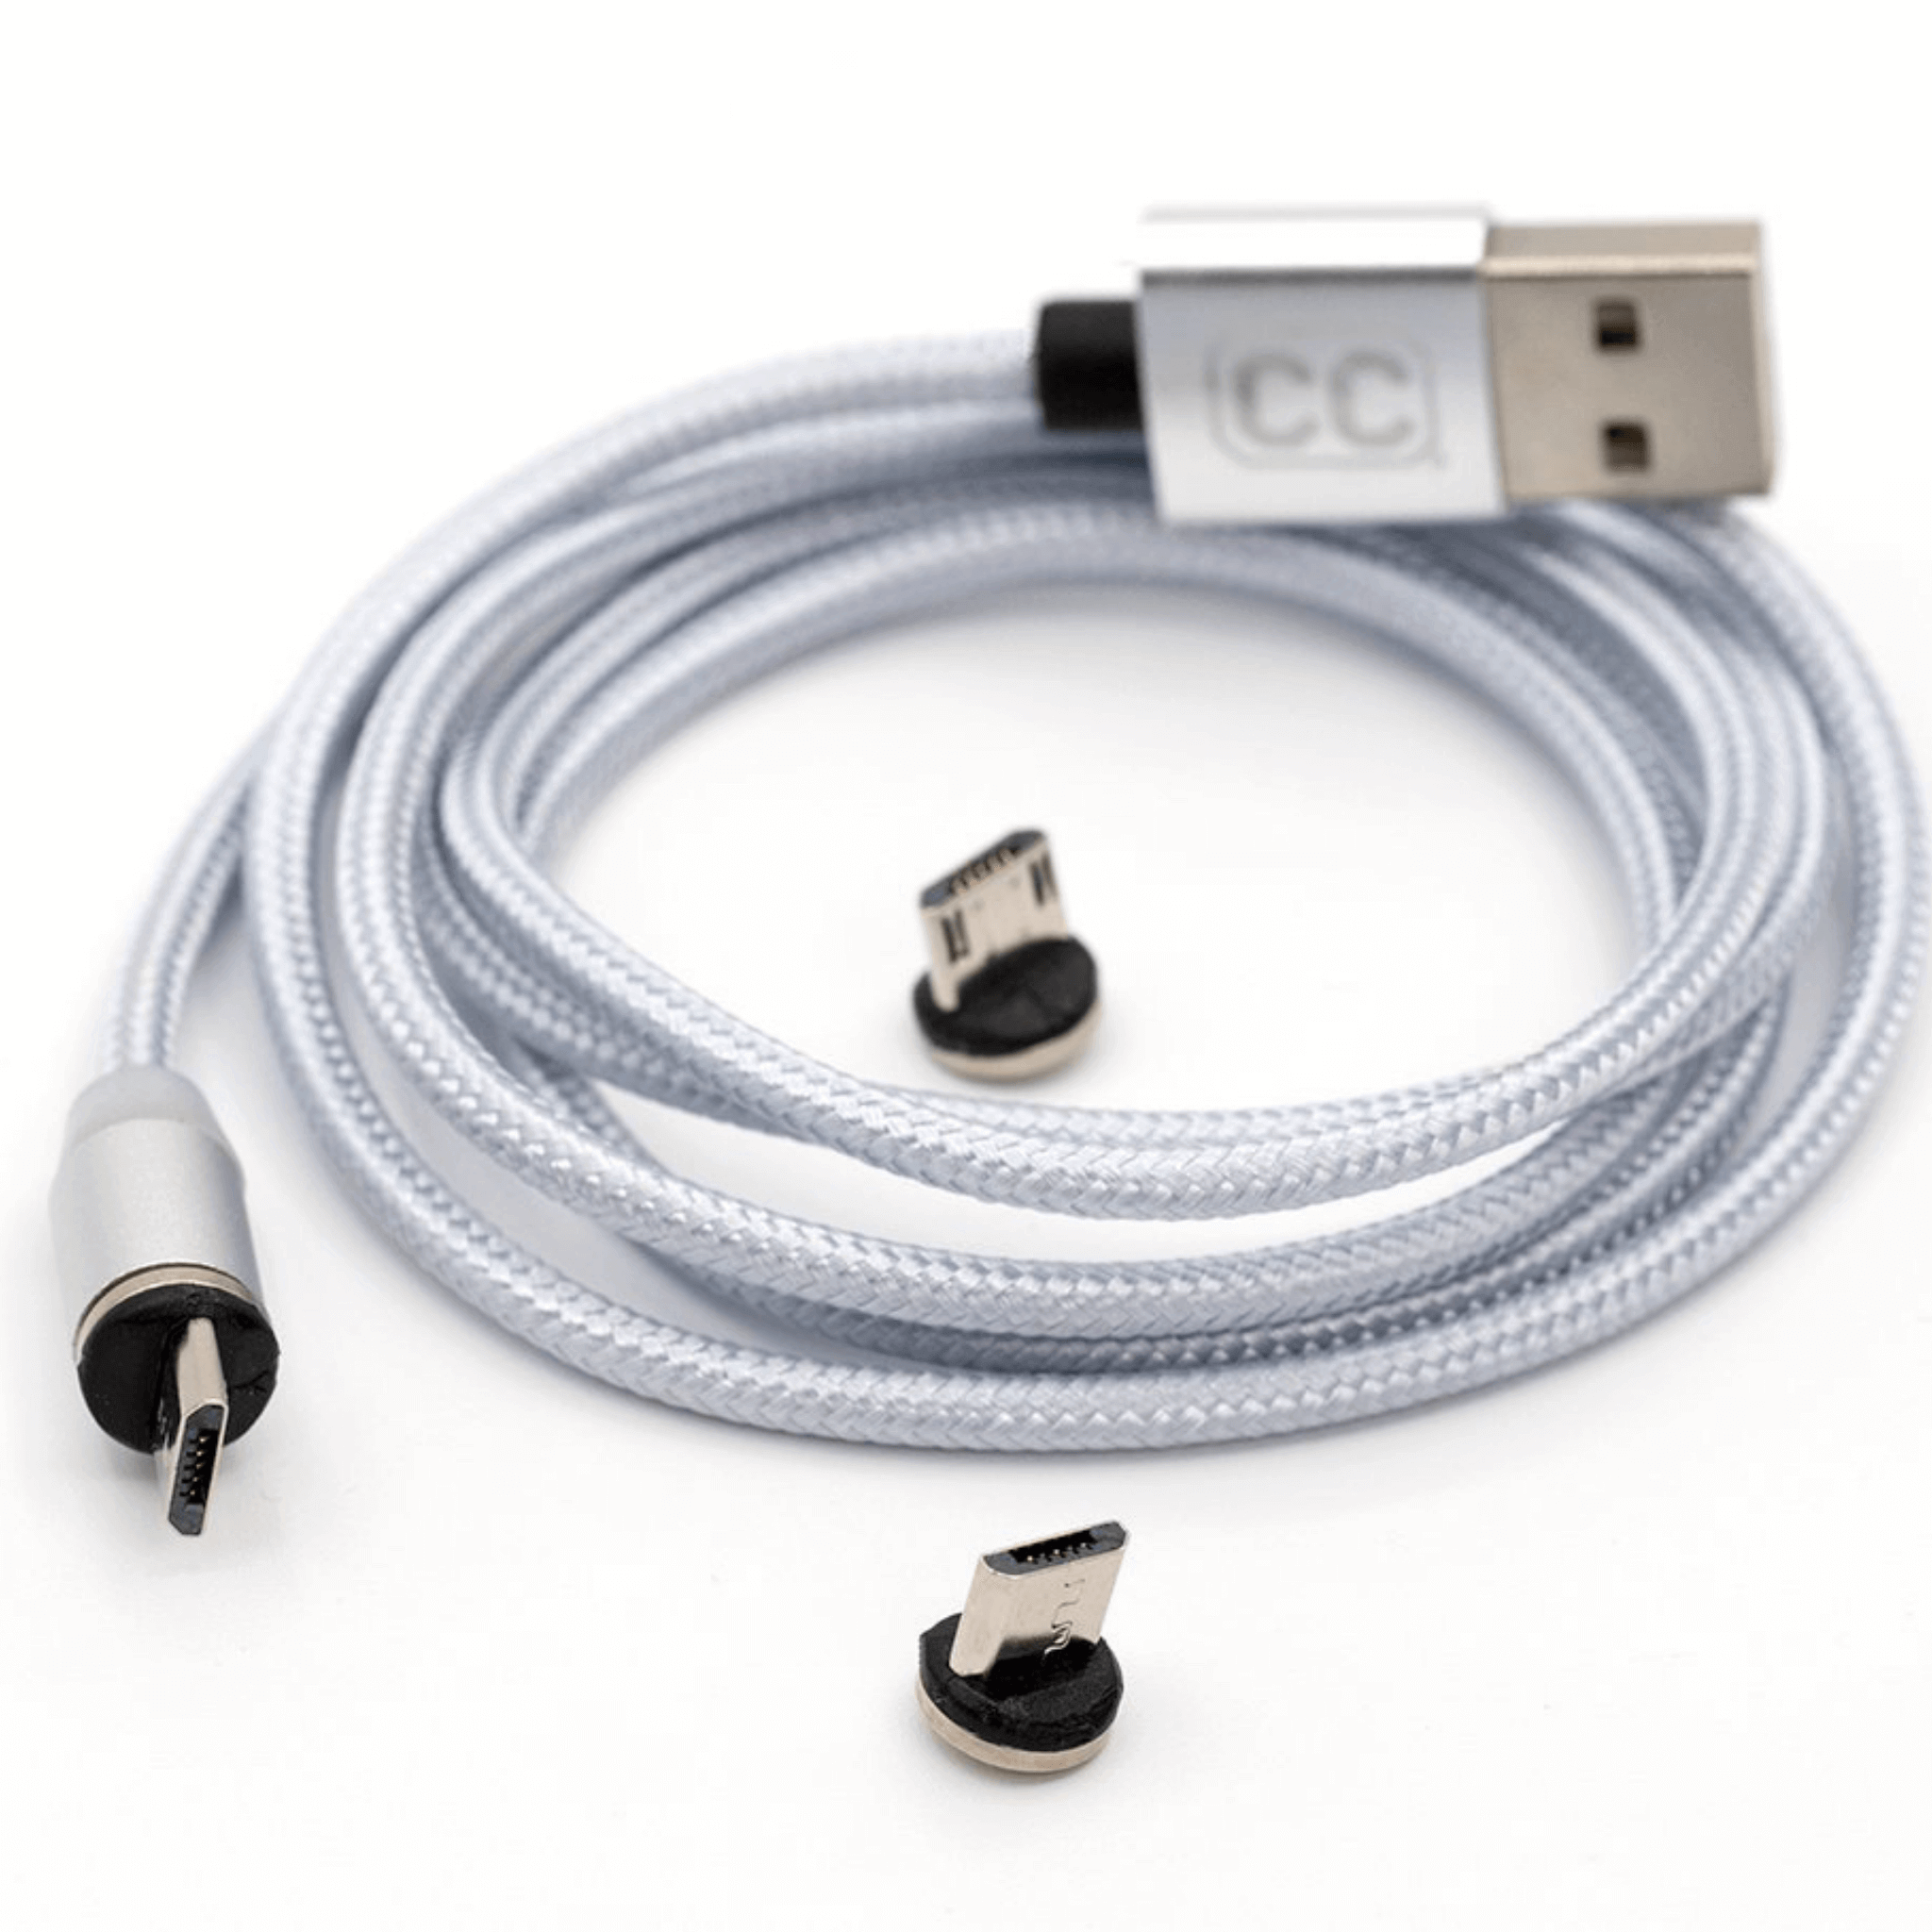 Coinkite Coldcard MK4 Cryptocurrency Hardware Wallet USB-C Cable